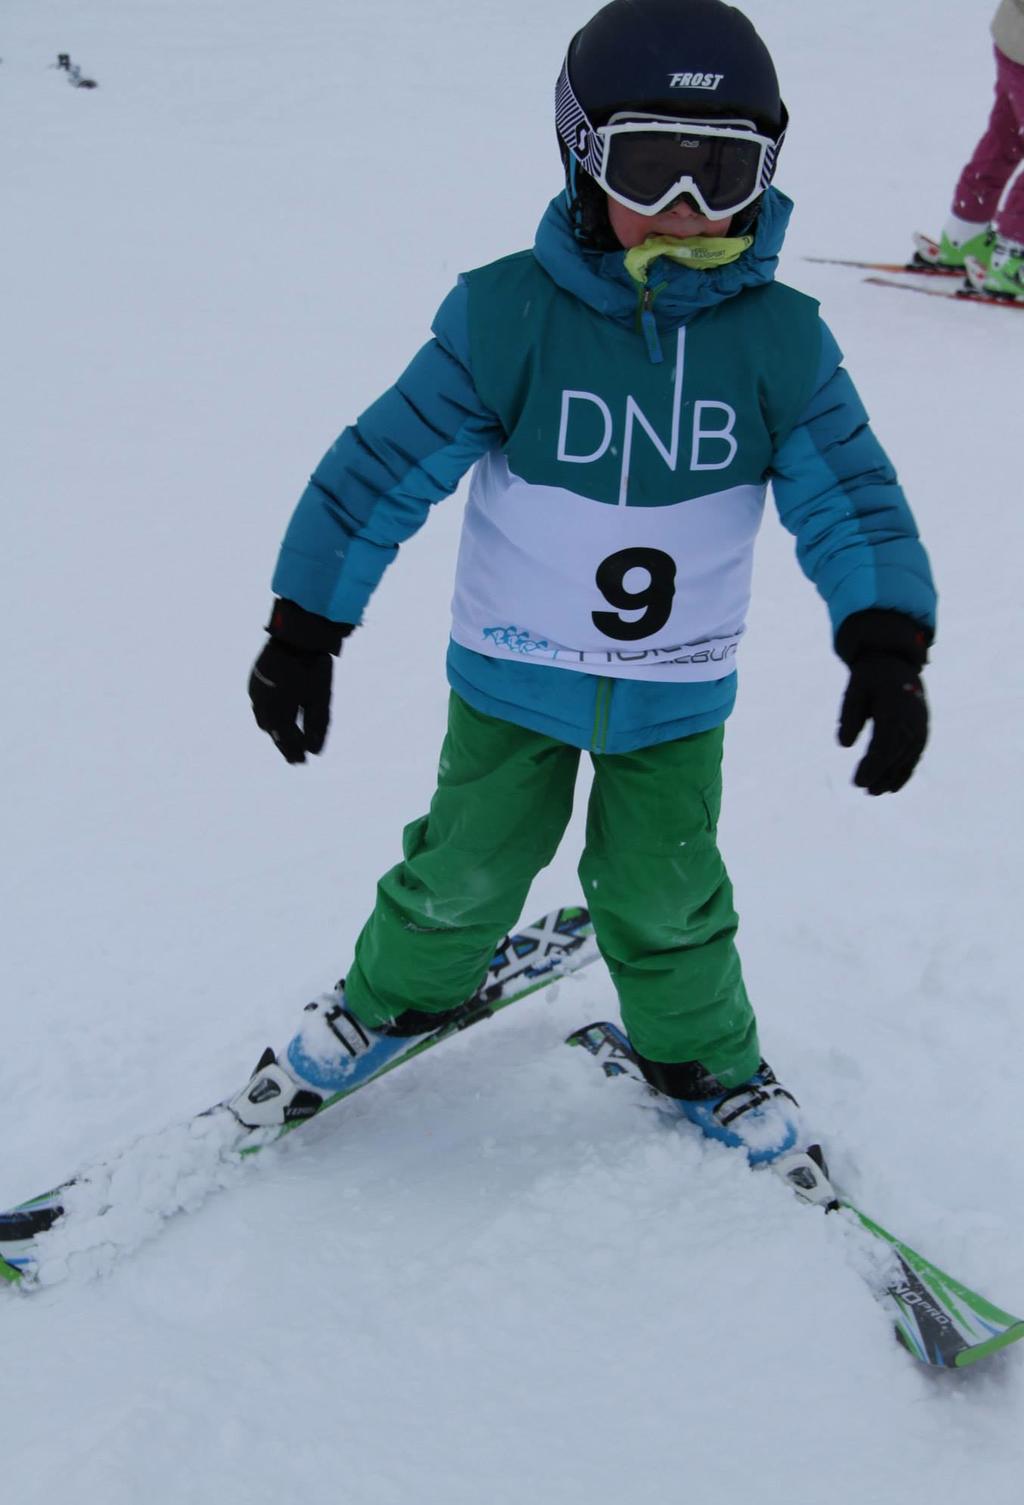 Special Activities: The primary special activities for the event are: Free skiing and snowboarding Free and discounted ski lessons Free and discounted rental equipment Free and discounted food and